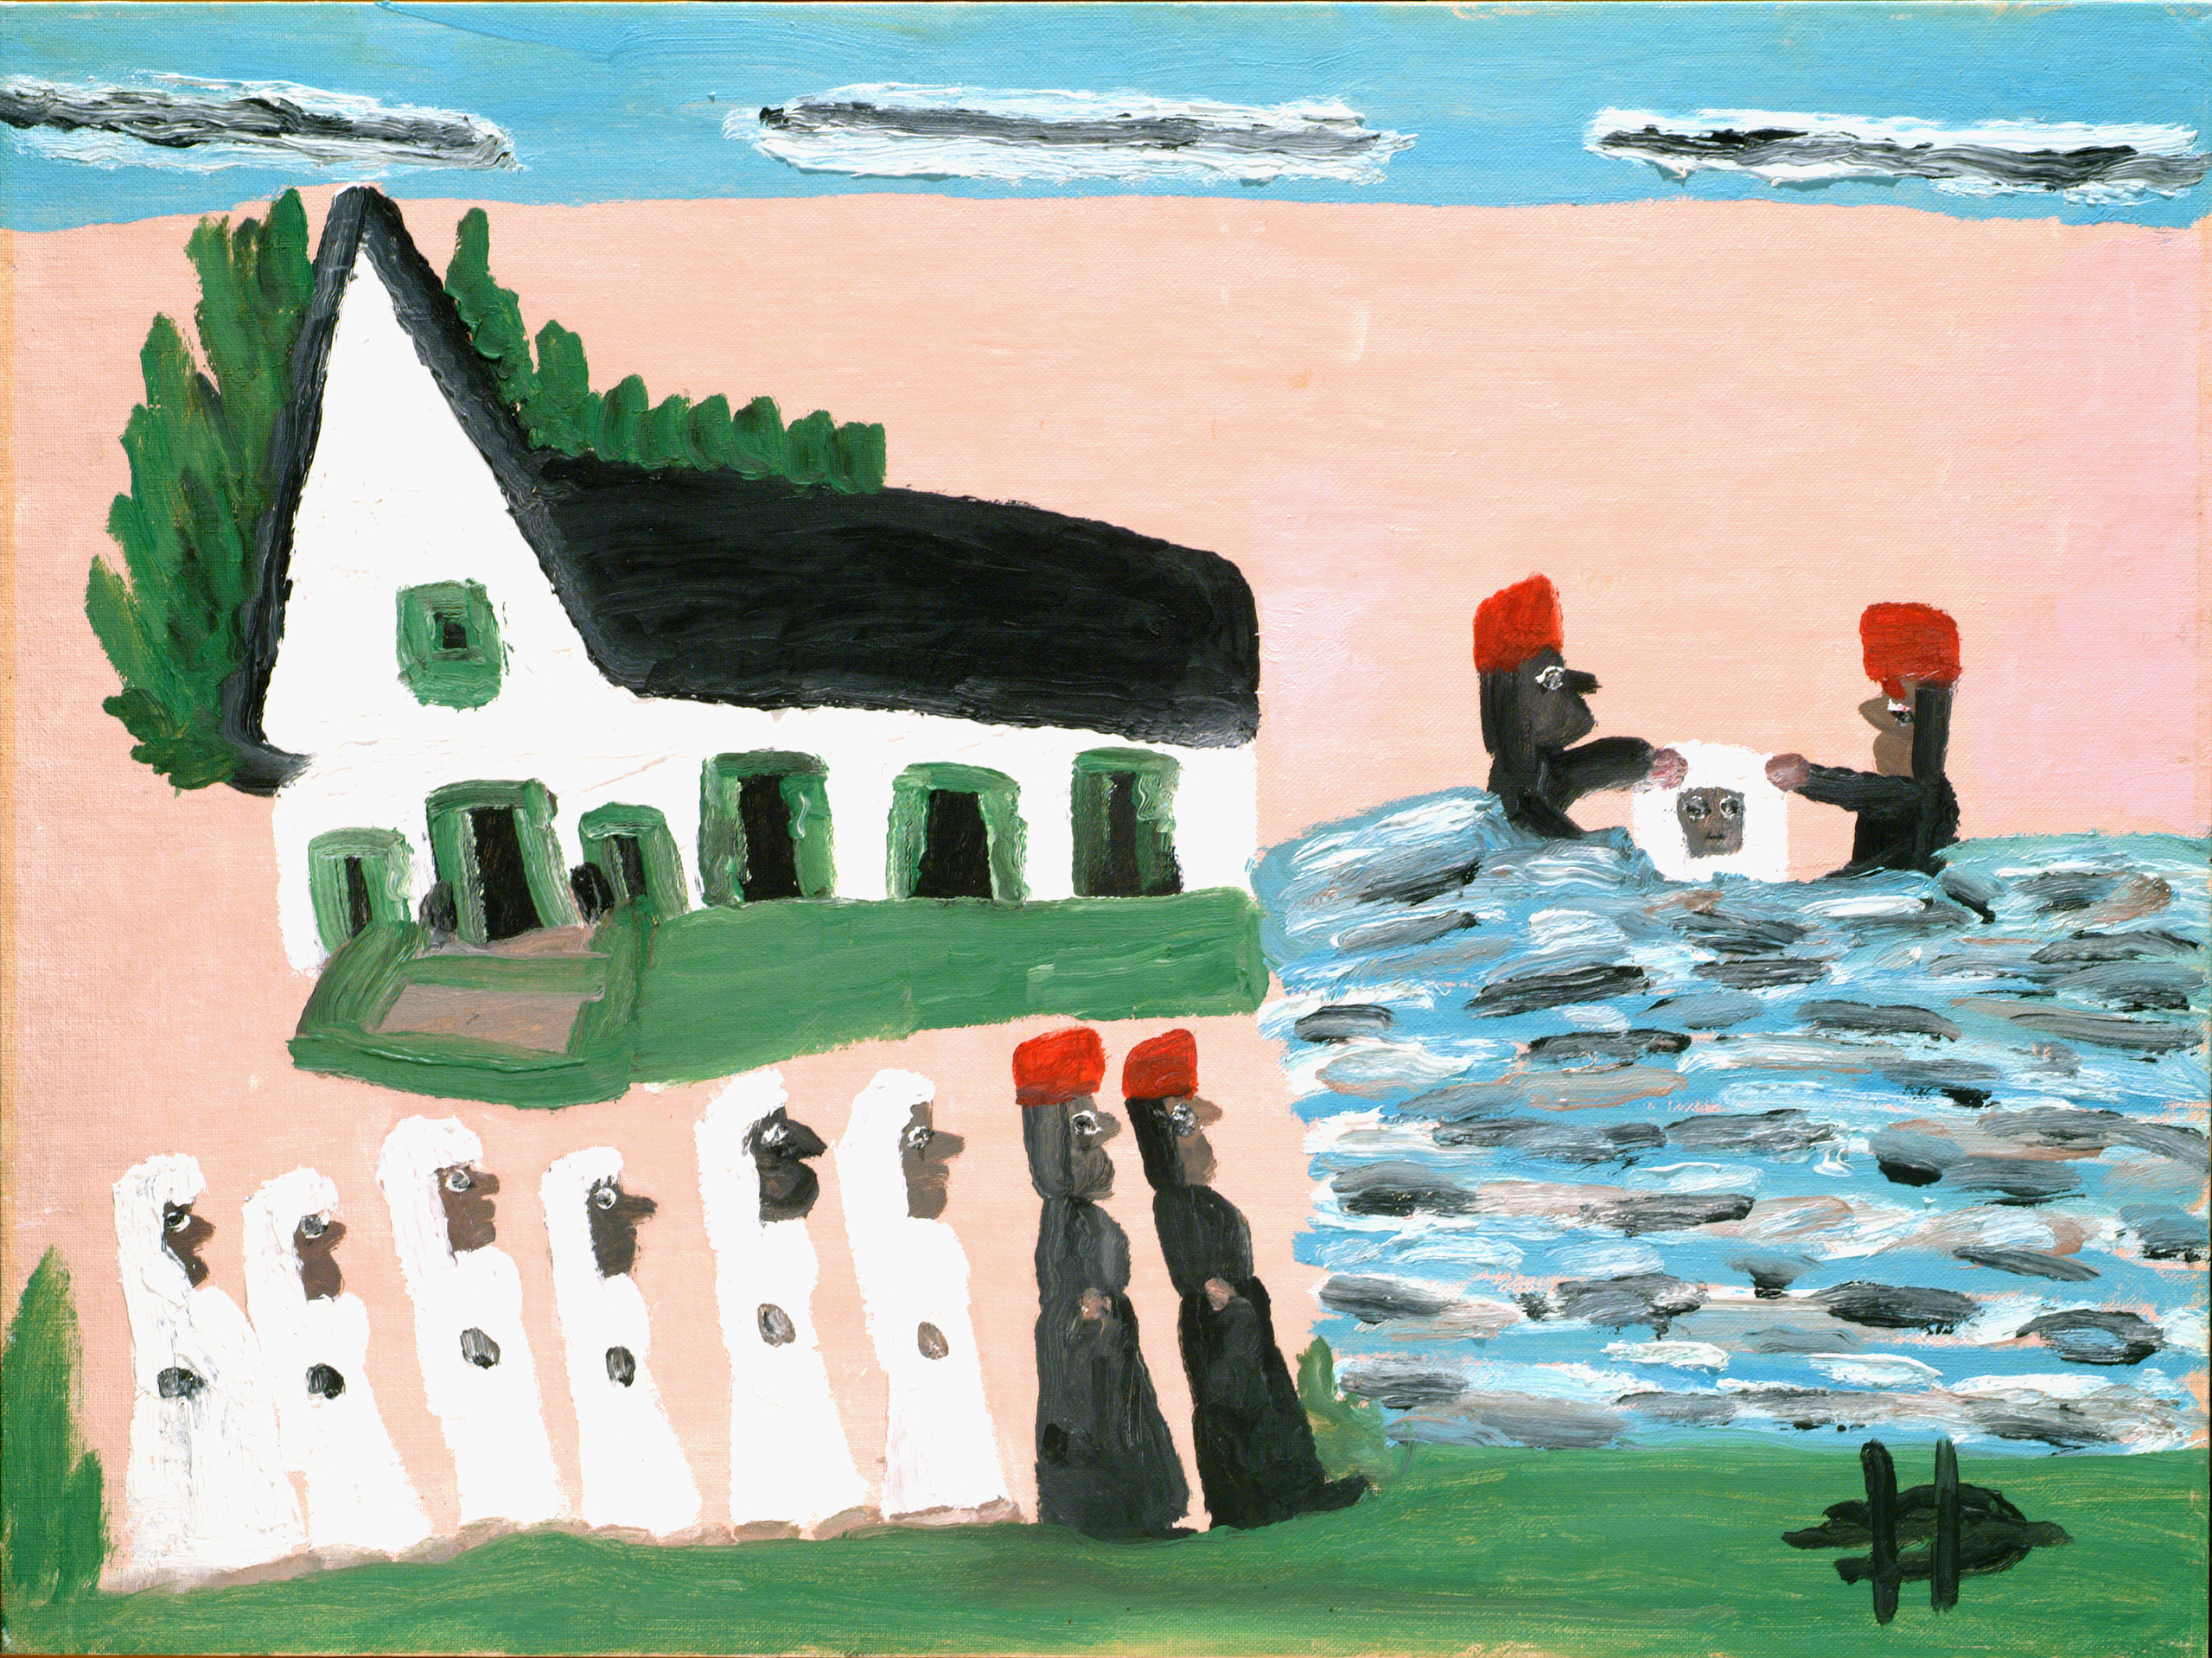 A simplistic painting of a white church under a blue sky on a peachy background and dark-skinned figures in expressionless profile. A line of people in white behind two people in black with red caps stand on grass, facing a baptism in water.